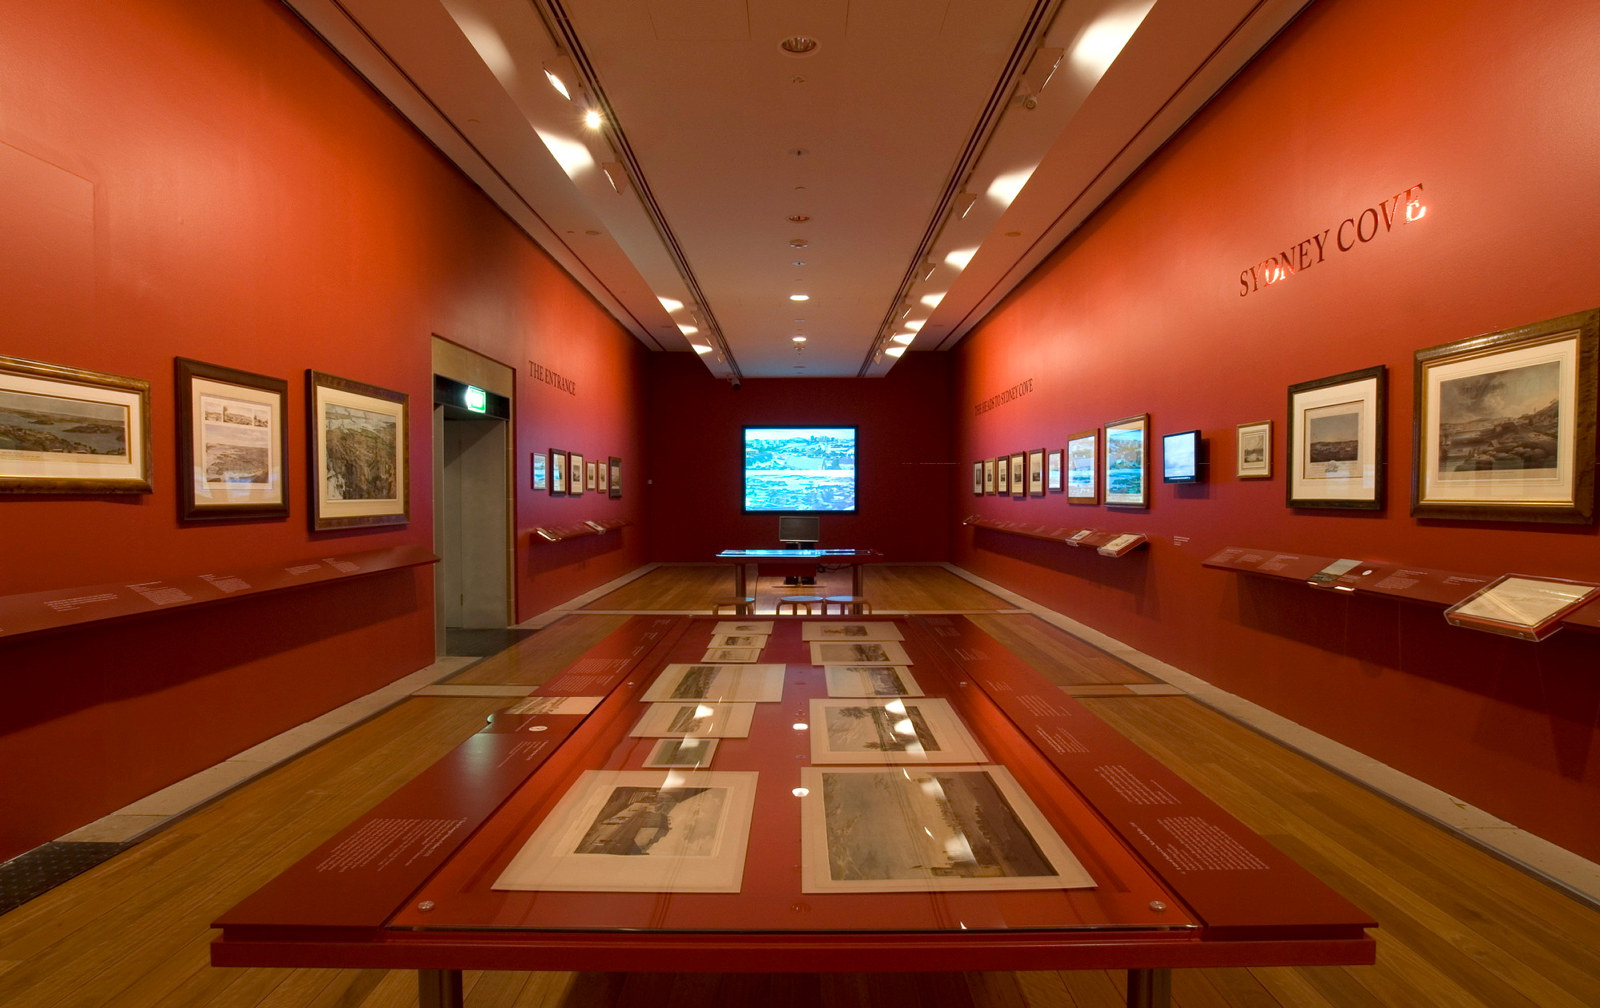 Sydney views 1788-1888: from the Beat Knoblauch collection installation view